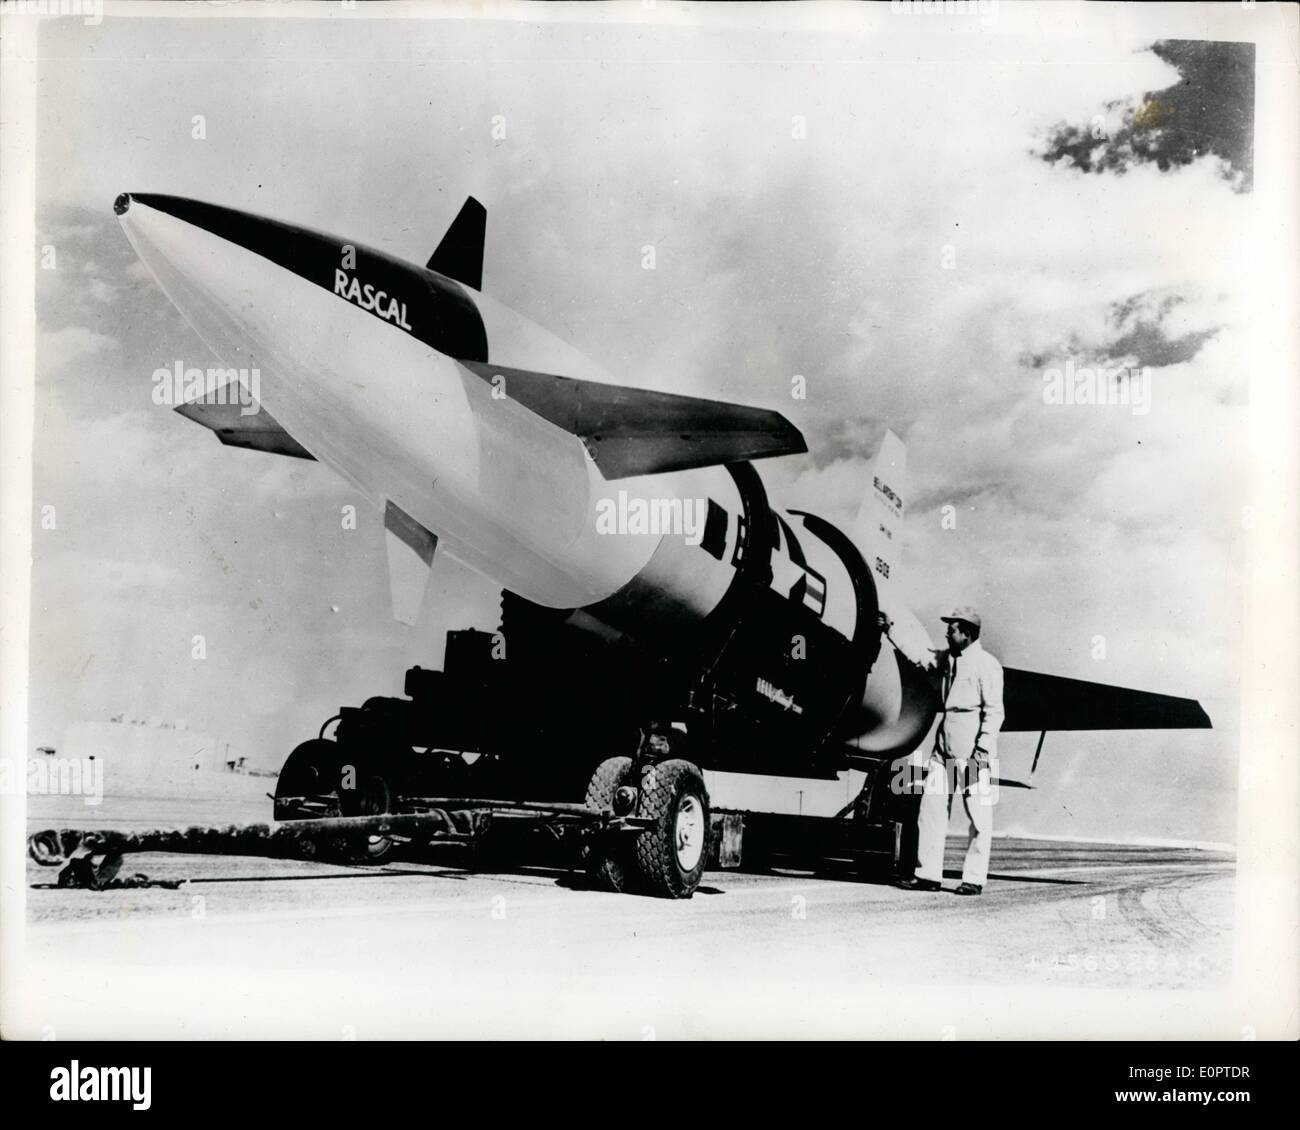 Feb. 02, 1957 - They Call It The ''The Rascal''.... New Pilotless Bomber of The U.S. Forces. Developed by the United States Bell Aircraft Corporation is ''The Rascal'' - latest missile of the American forces.. The 'Rascal' is powered by powerful rocket engine - which drives it at supersonic speeds. It is carried by B-47 aircraft - and is released many miles from the target - permitting the carrier to avoid high altitude defensive measures.. Keystone Photo Shows:- View of the G.A.M. 63. Pilotless Bomber - known as ''The Rascal' Stock Photo